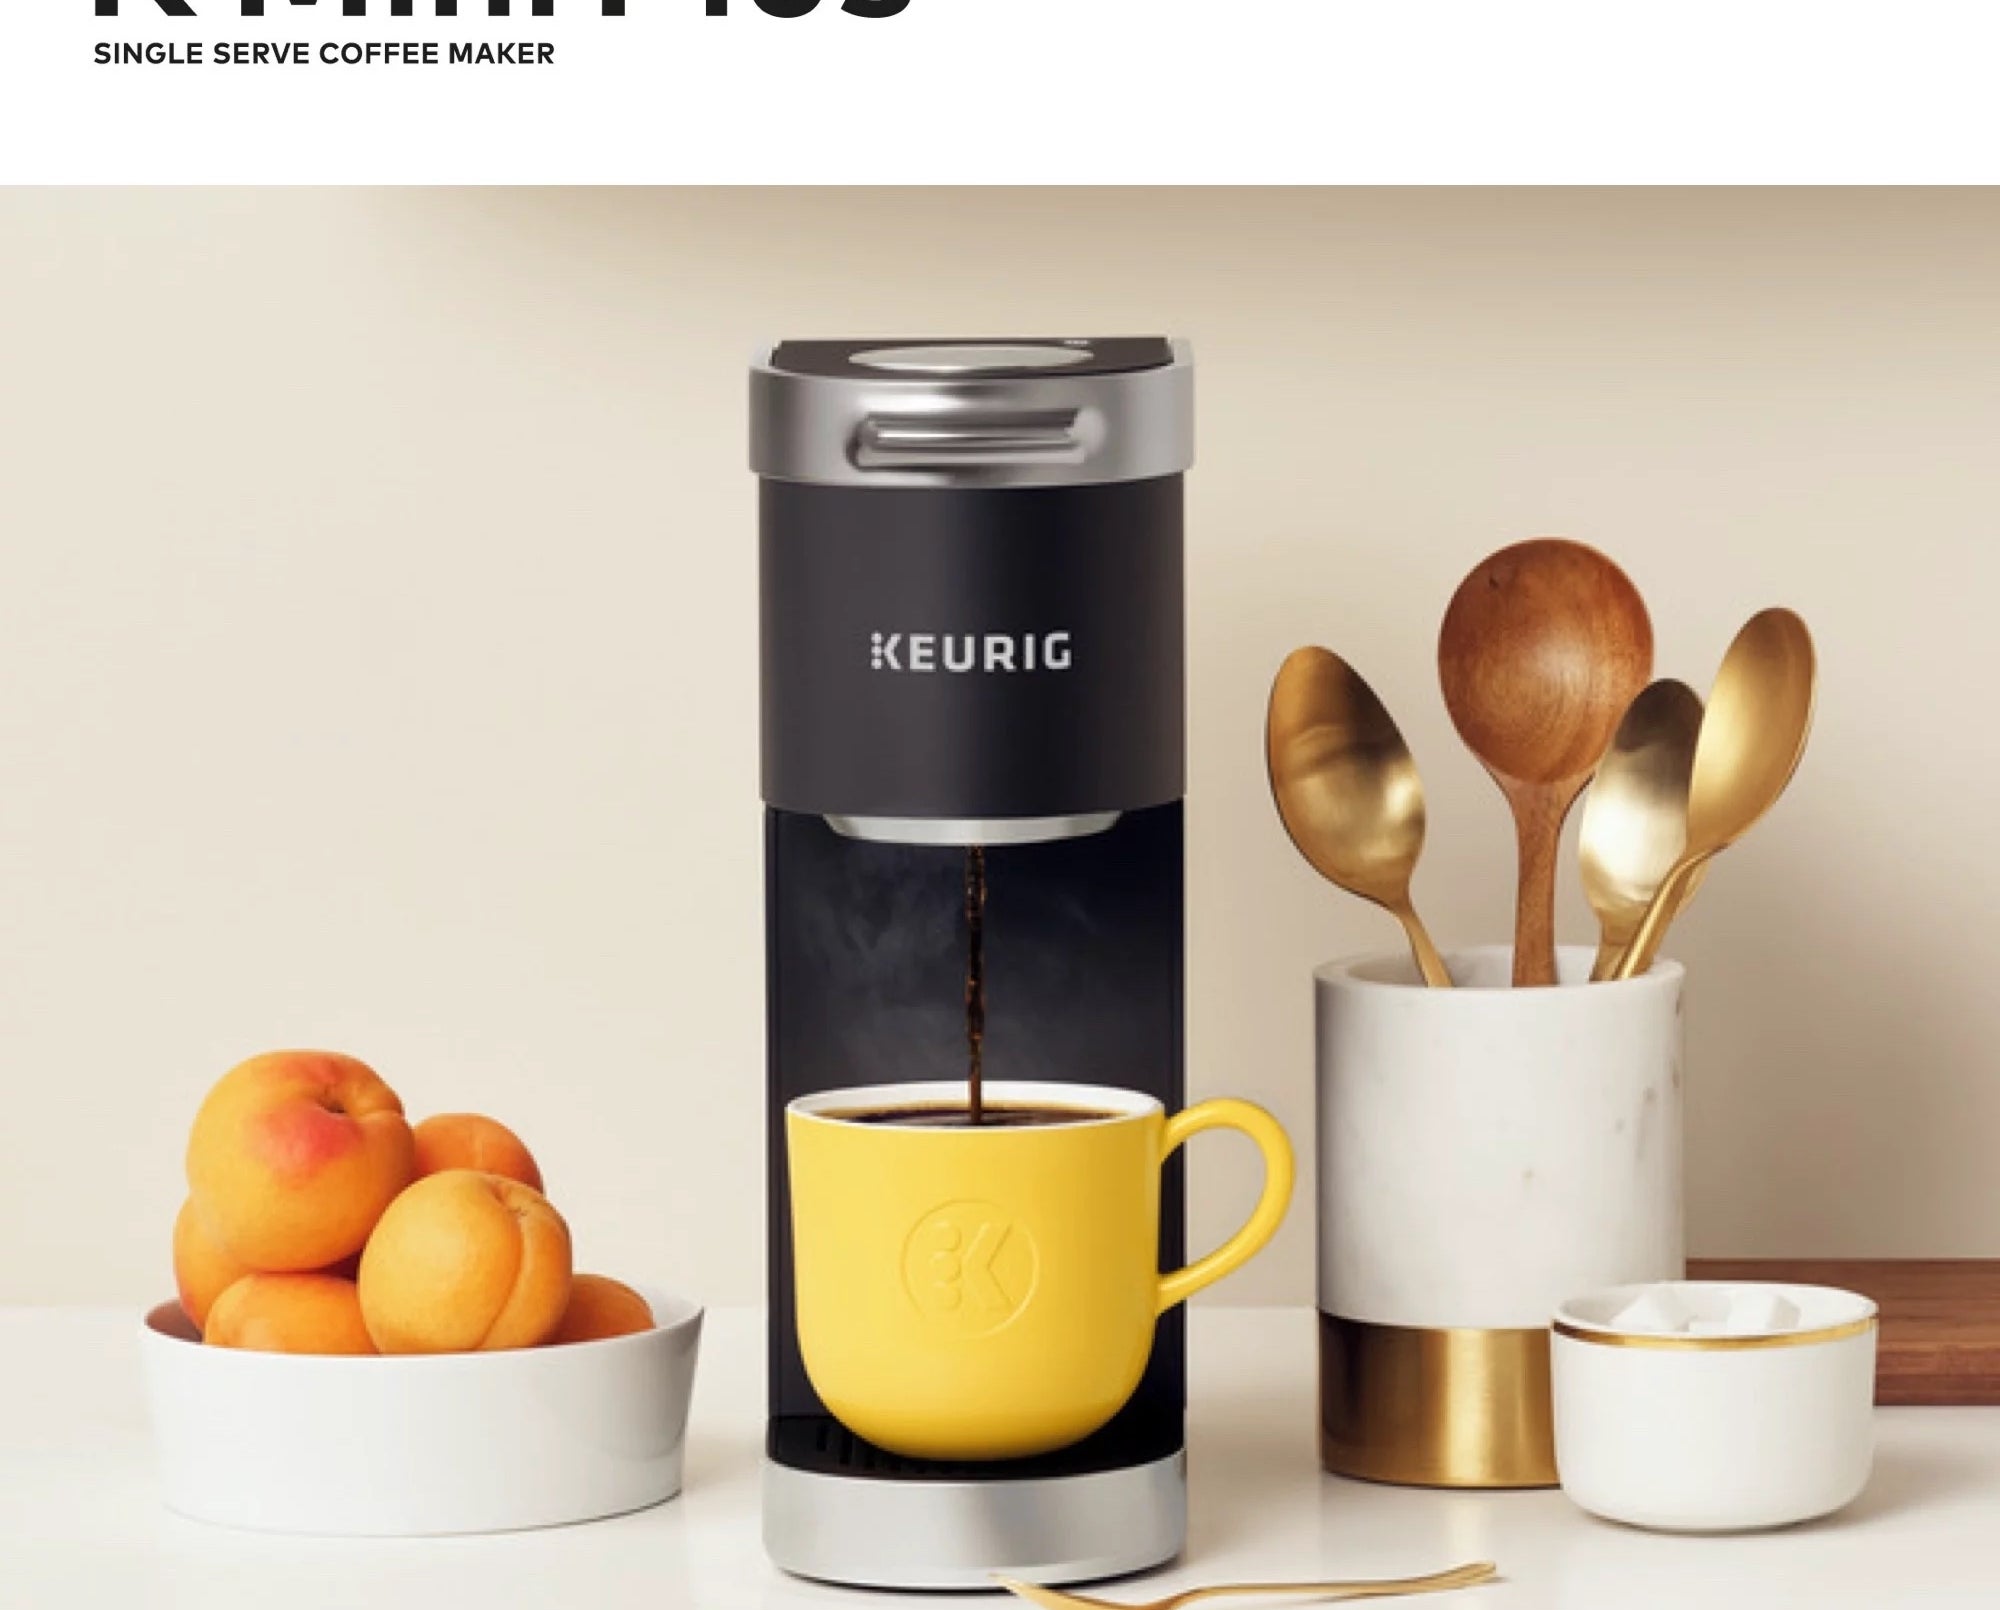 Black coffee maker with a yellow mug on a countertop with various kitchen accessories